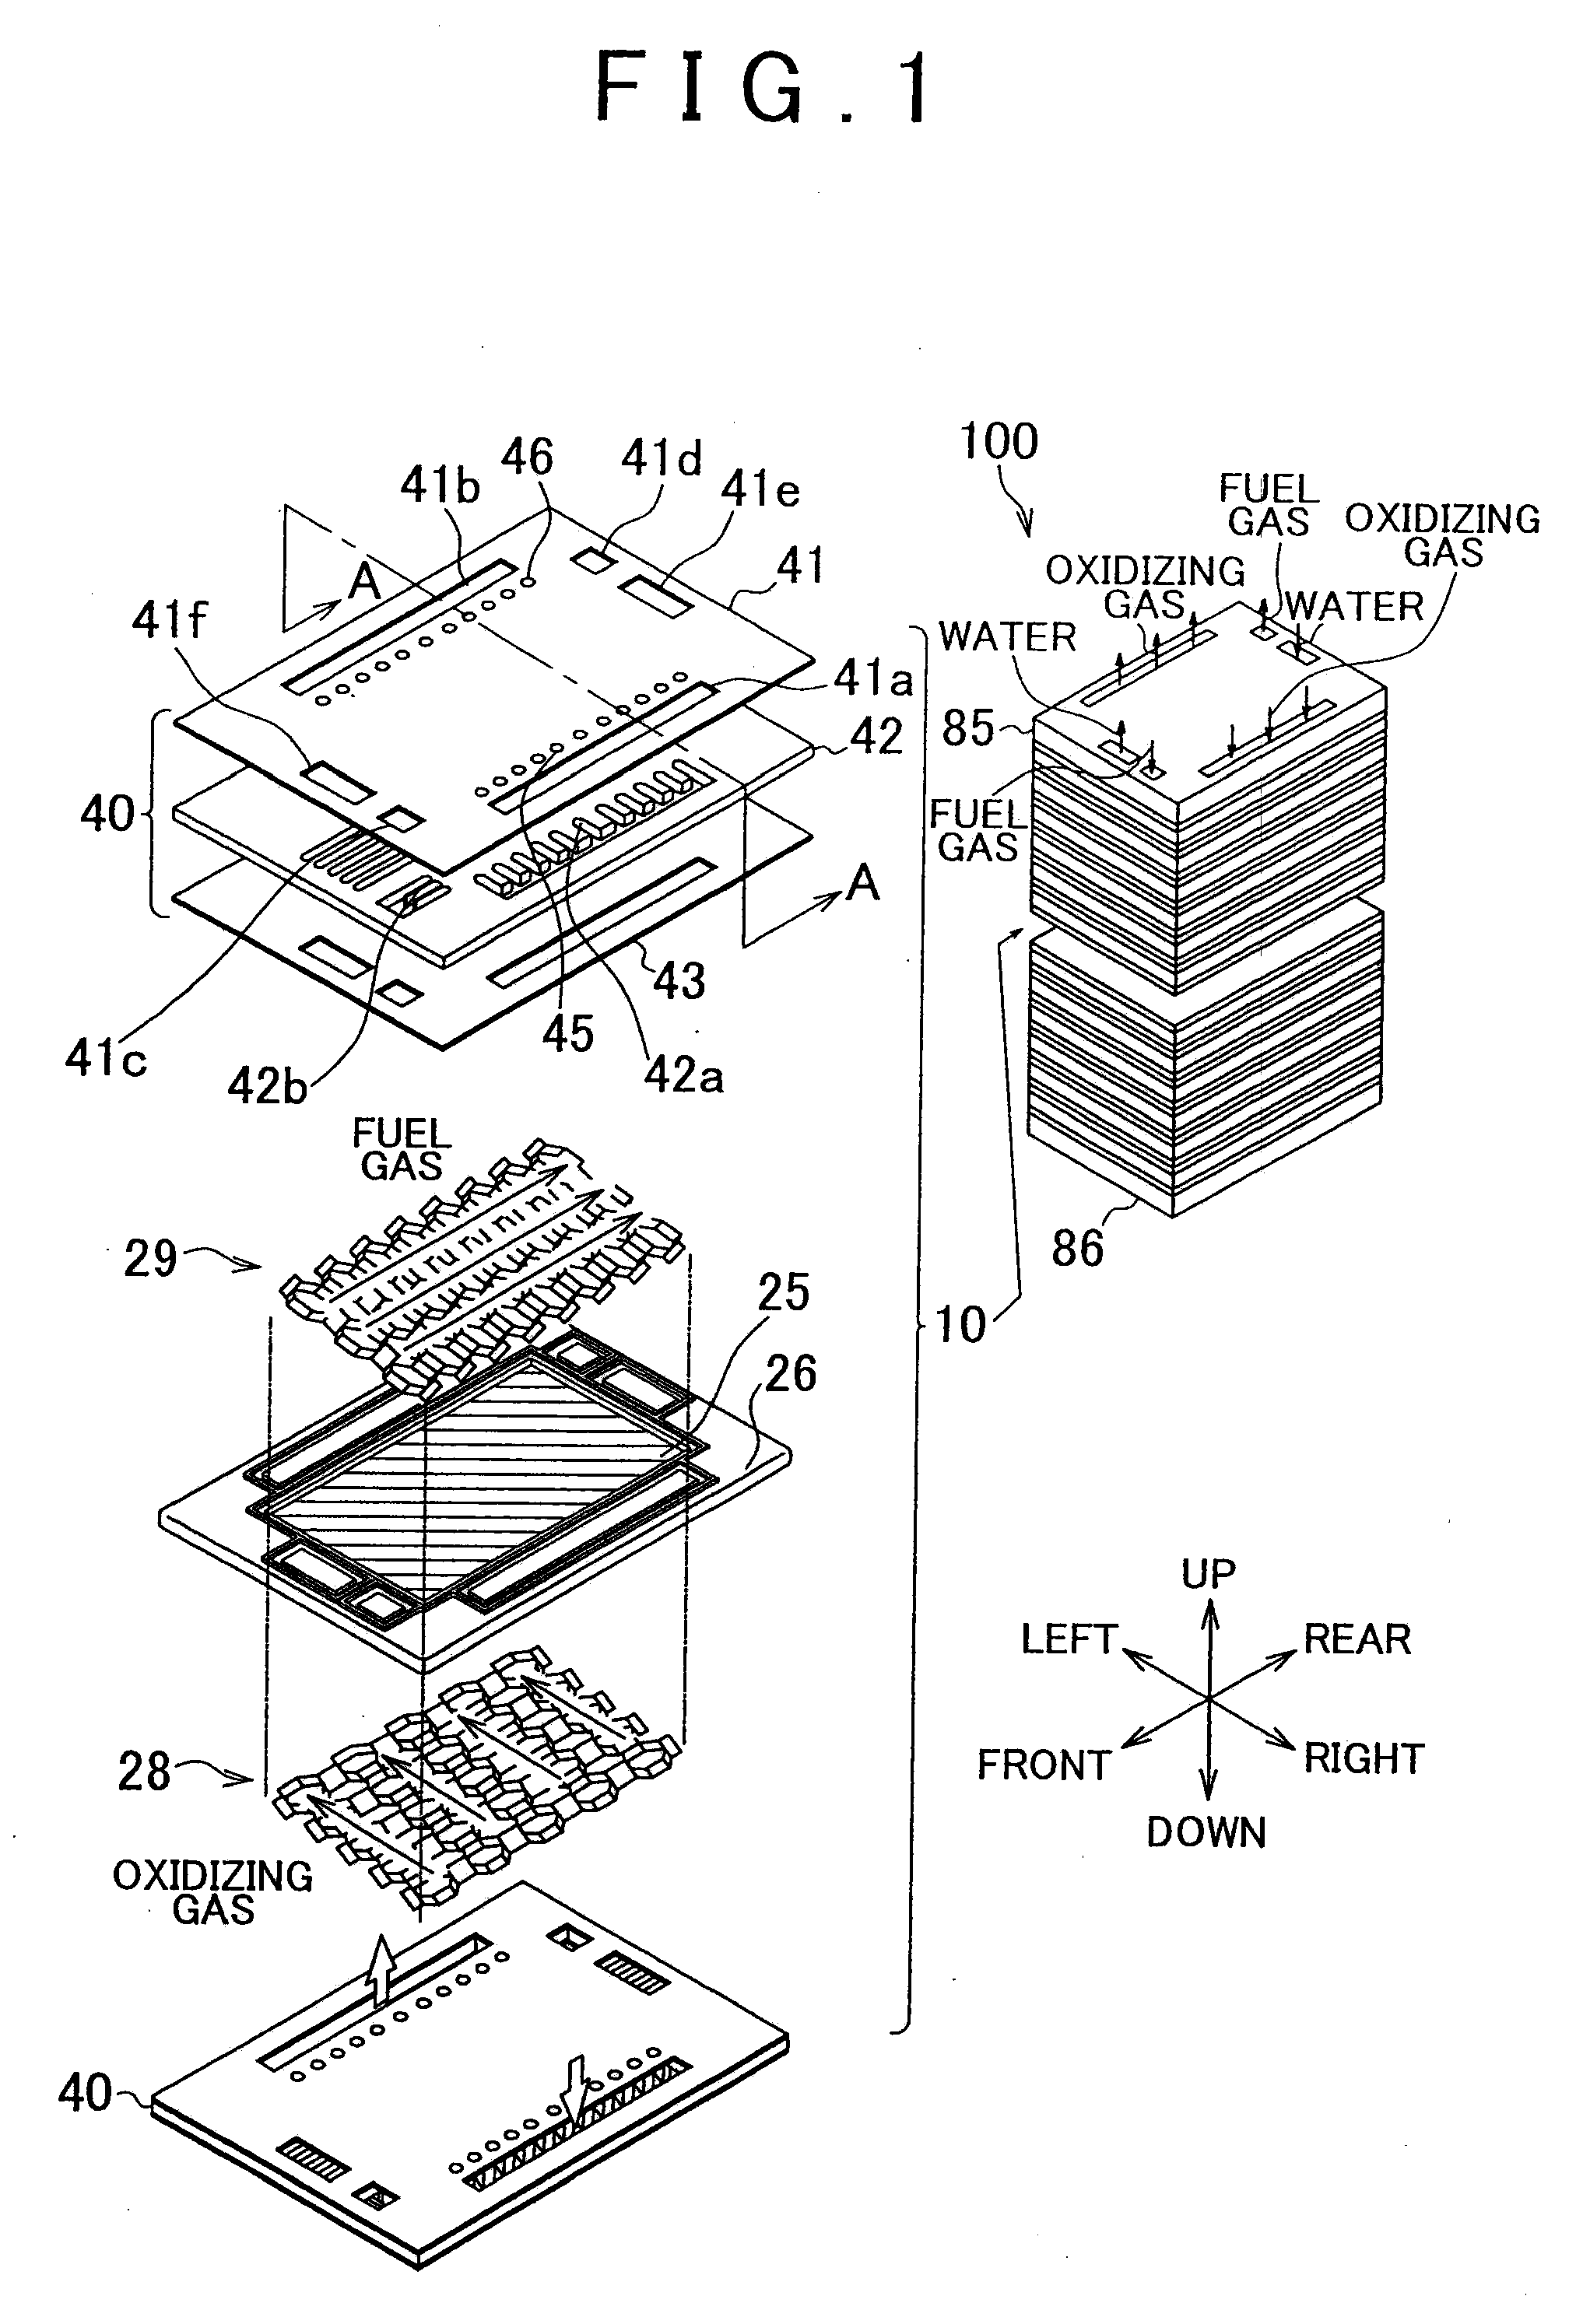 Gas diffusion layer in a fuel cell